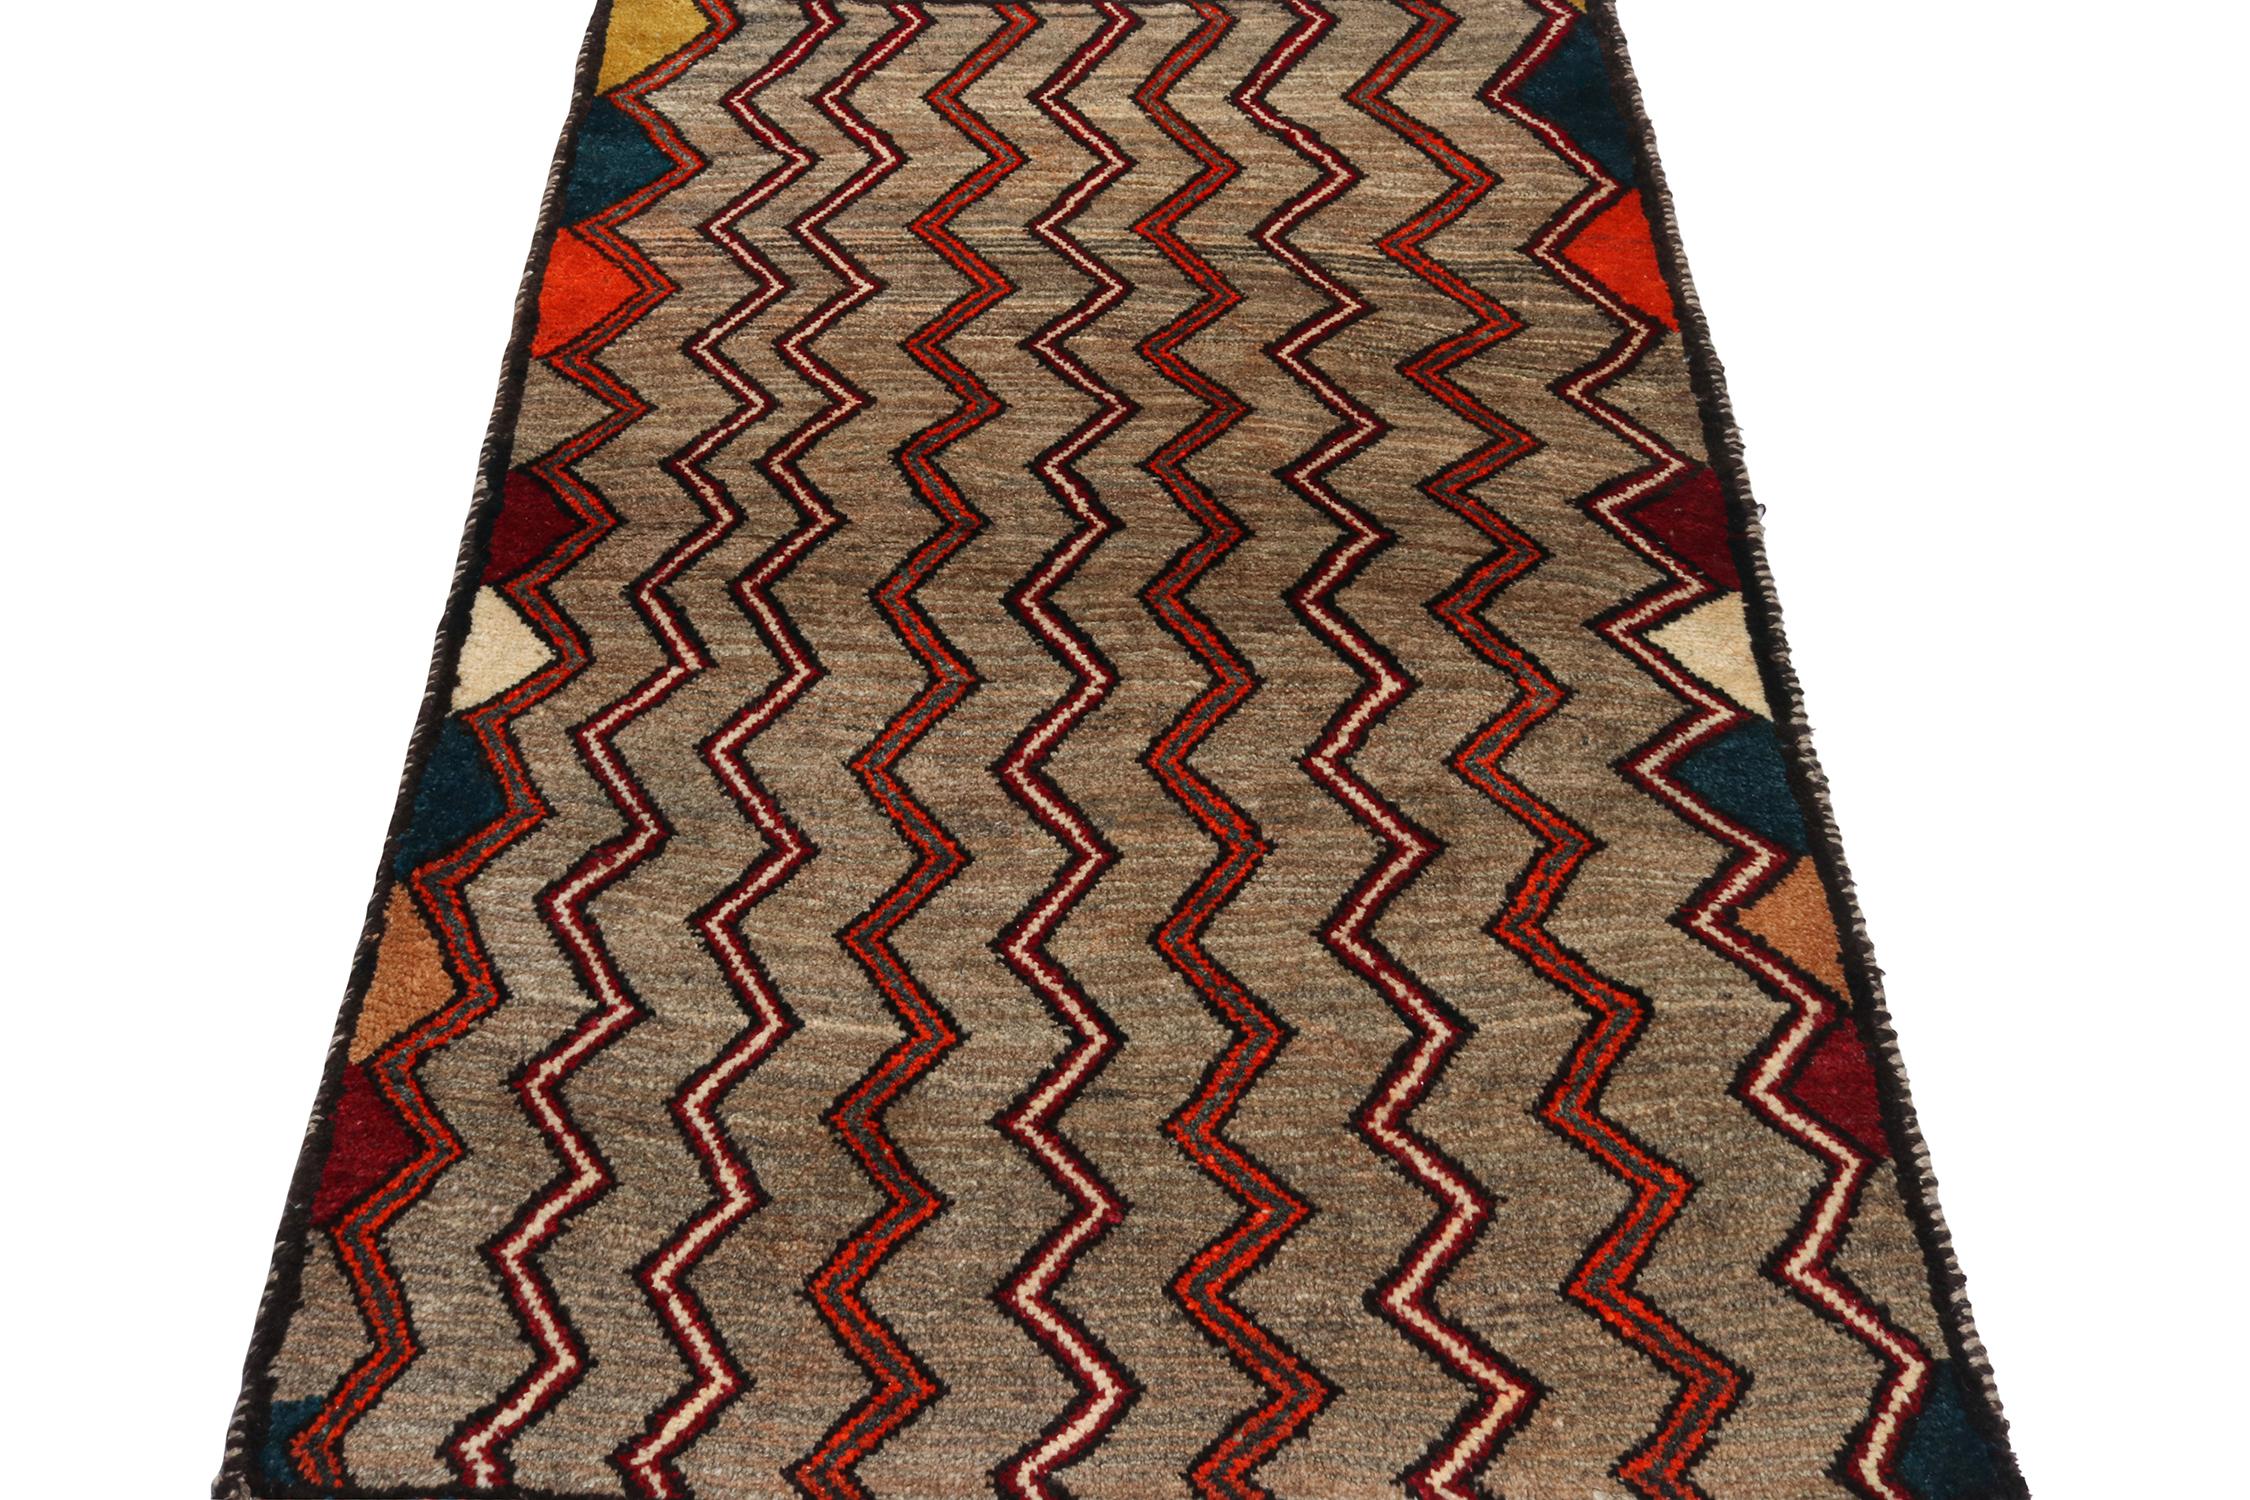 Turkish Vintage Gabbeh Tribal Rug in Beige-Brown and Red Chevron Patterns by Rug & Kilim For Sale